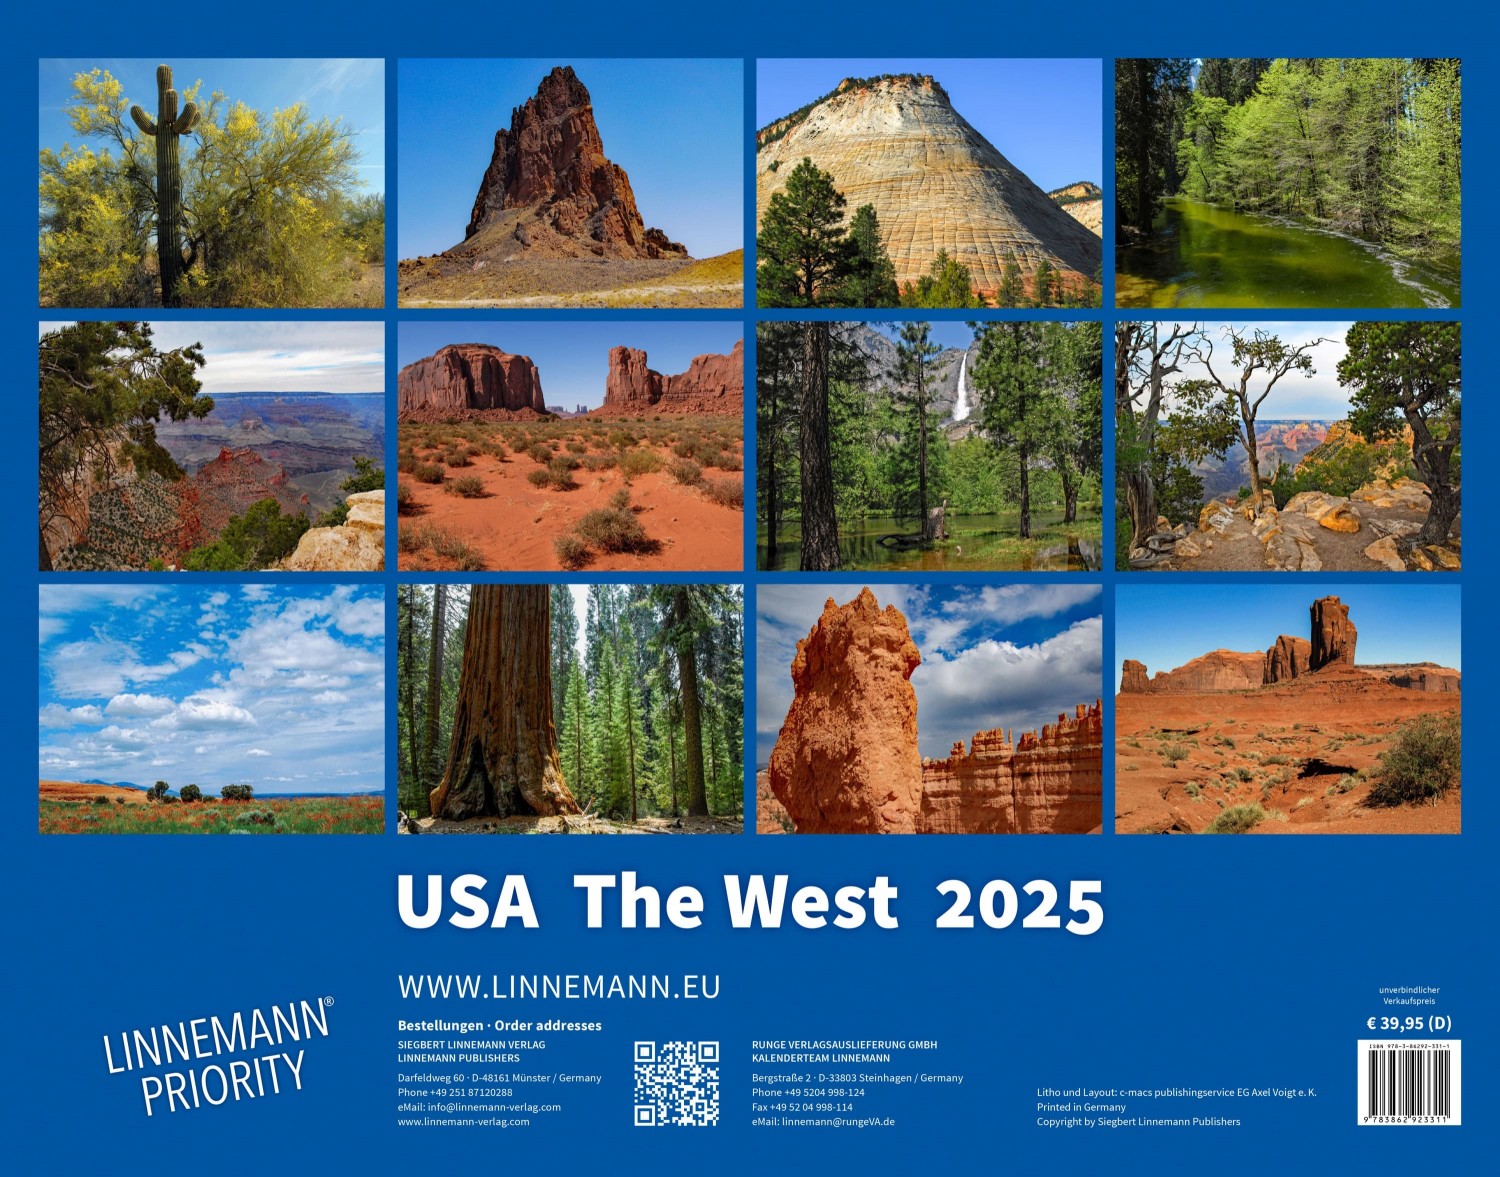 USA The West 2025